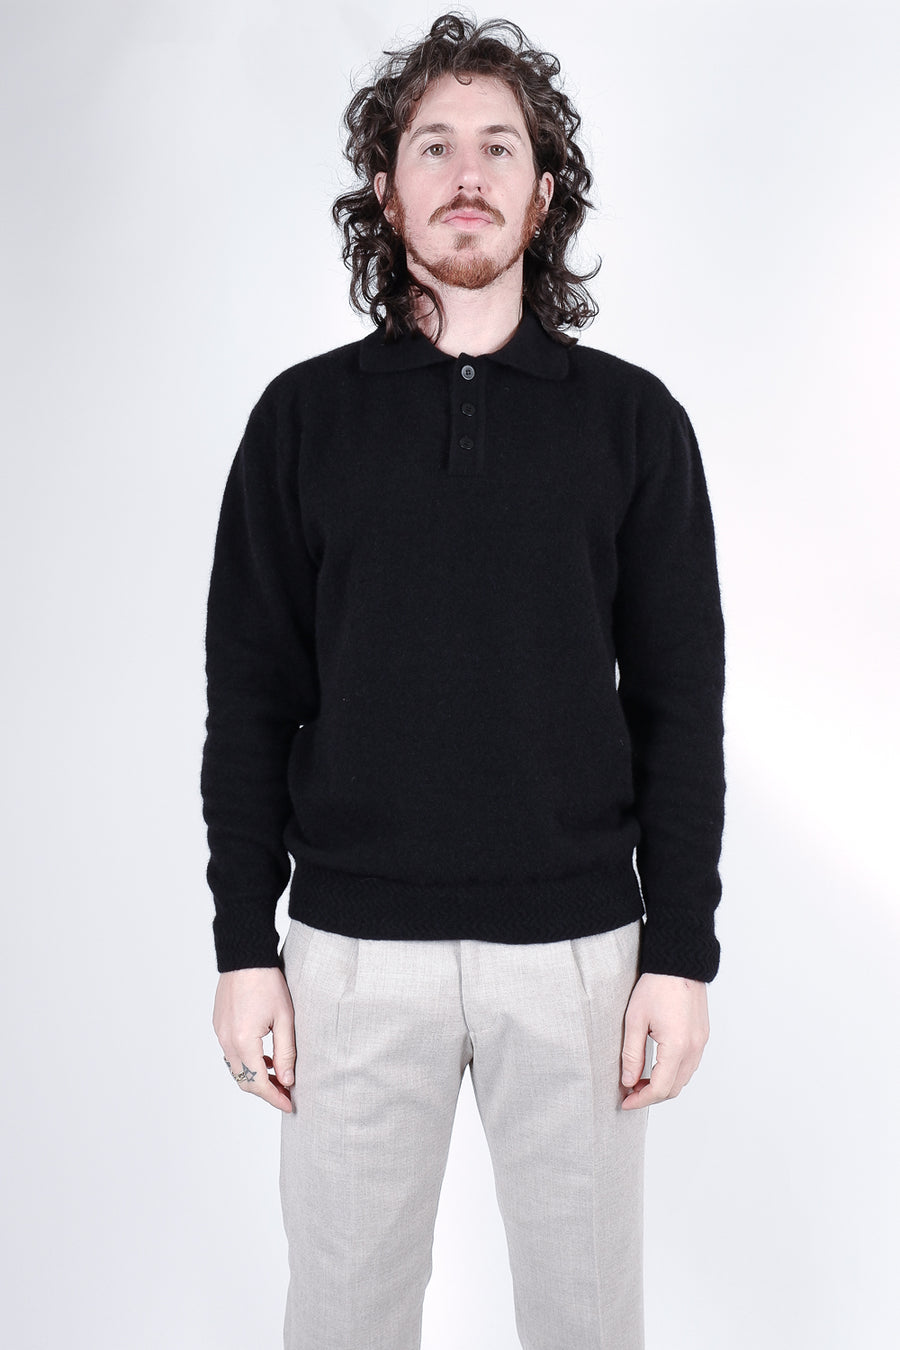 Buy the Daniele Fiesoli Alpaca Mixed Wool L/S Polo in Black at Intro. Spend £50 for free UK delivery. Official stockists. We ship worldwide.